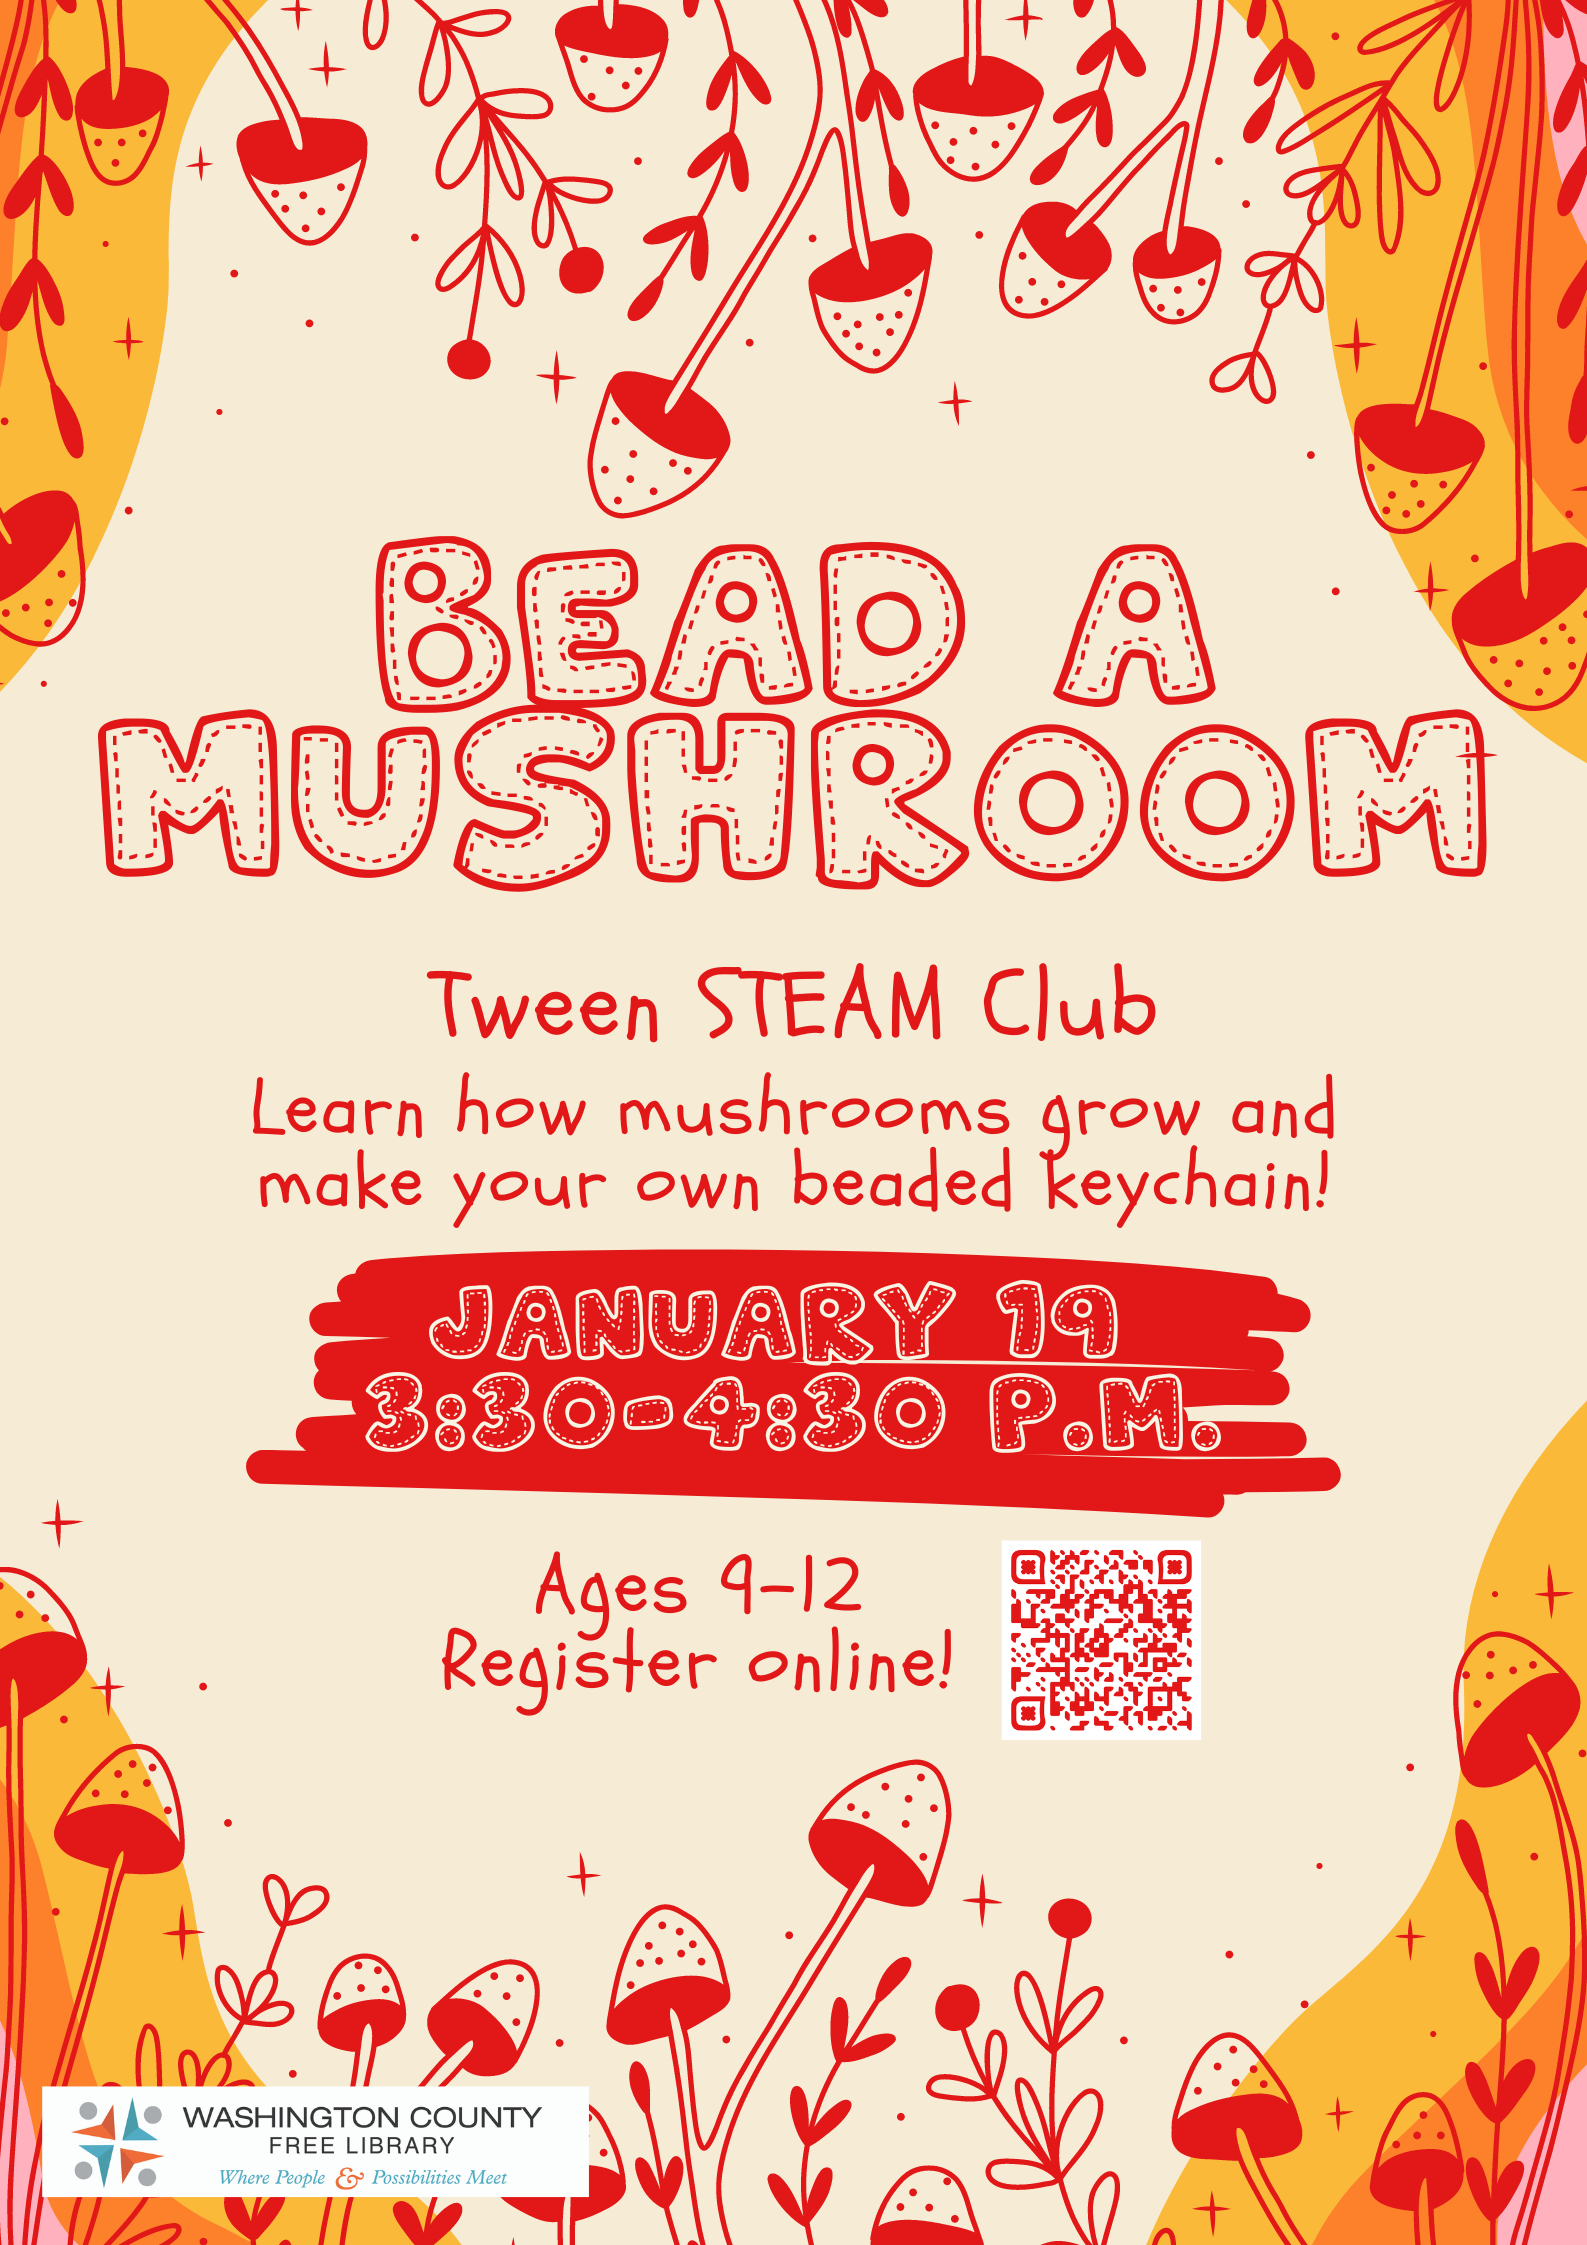 Bead a Mushroom Tween STEAM Club poster. The poster has a groovy 70s vibe to it, with red mushroom graphics growing from the top and bottom, and orange and yellow swirly rainbows adorning each corner. The text looks like quilt patches and handwriting. It reads: Bead a Mushroom: Tween STEAM Club. Learn how mushrooms grow and make your own beaded keychain. January 19, 3:30 p.m. Ages 9 to 12. Register online. There is a QR code provided for registration. 